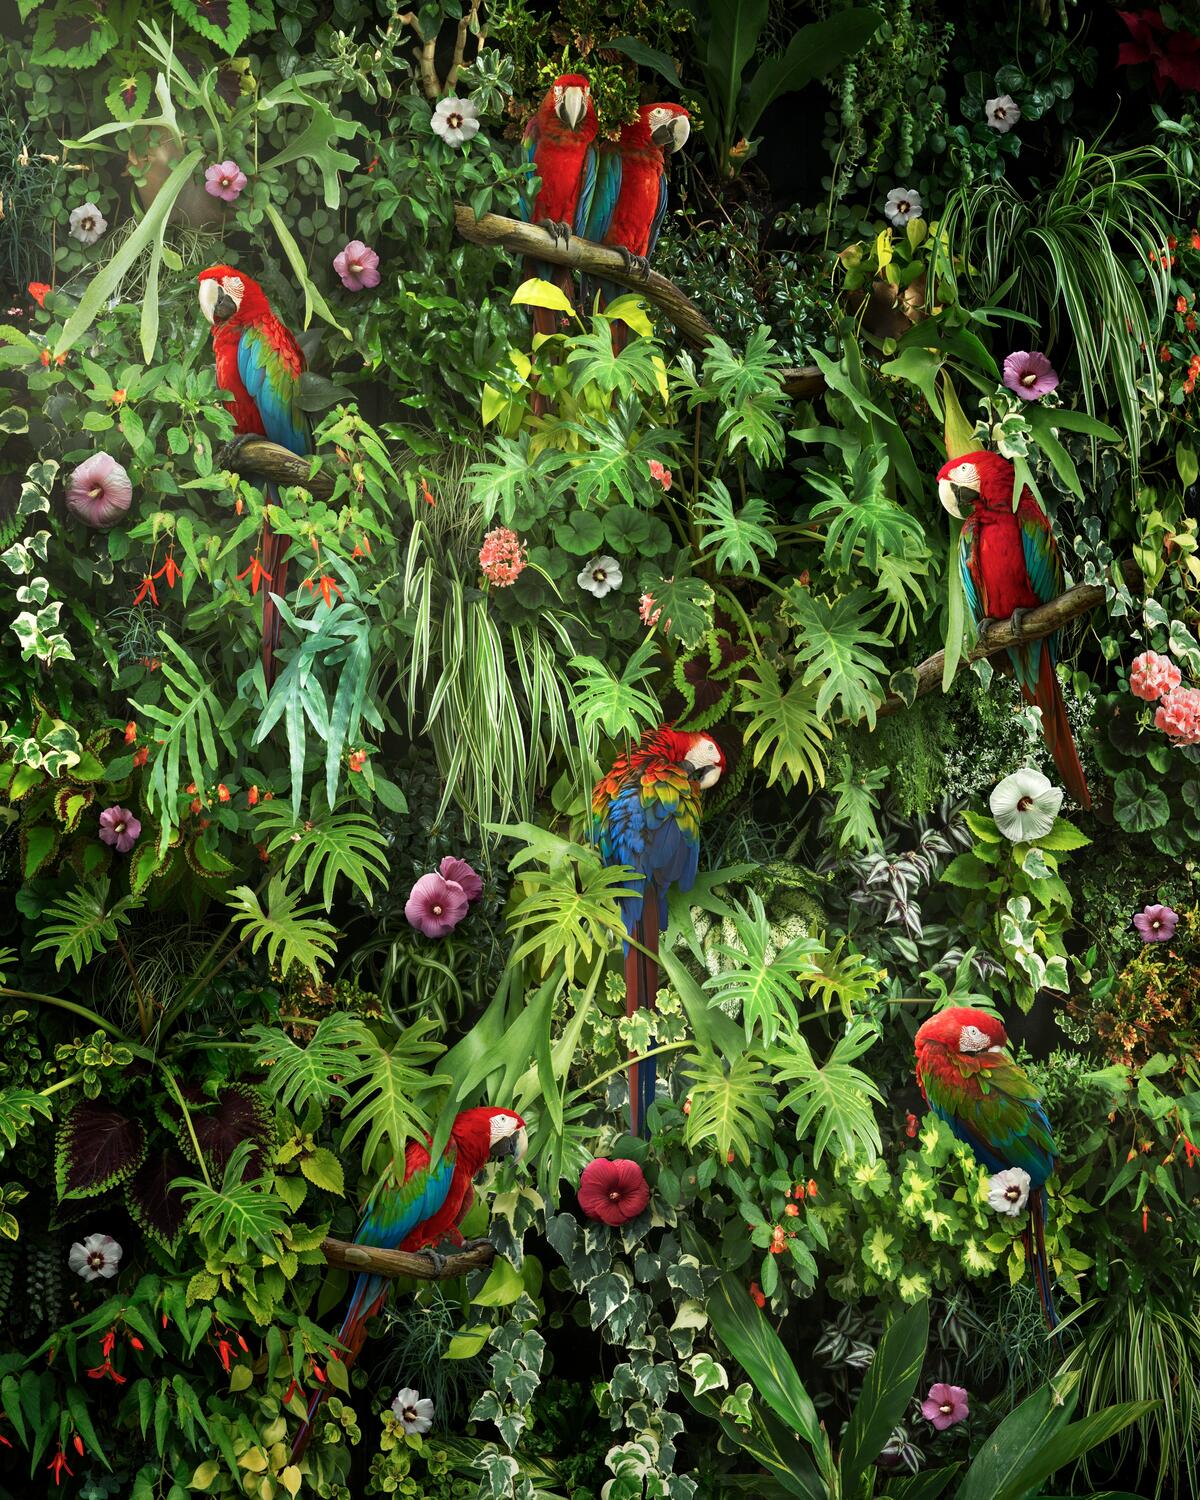 A large number of macaws sit on a large green shrub